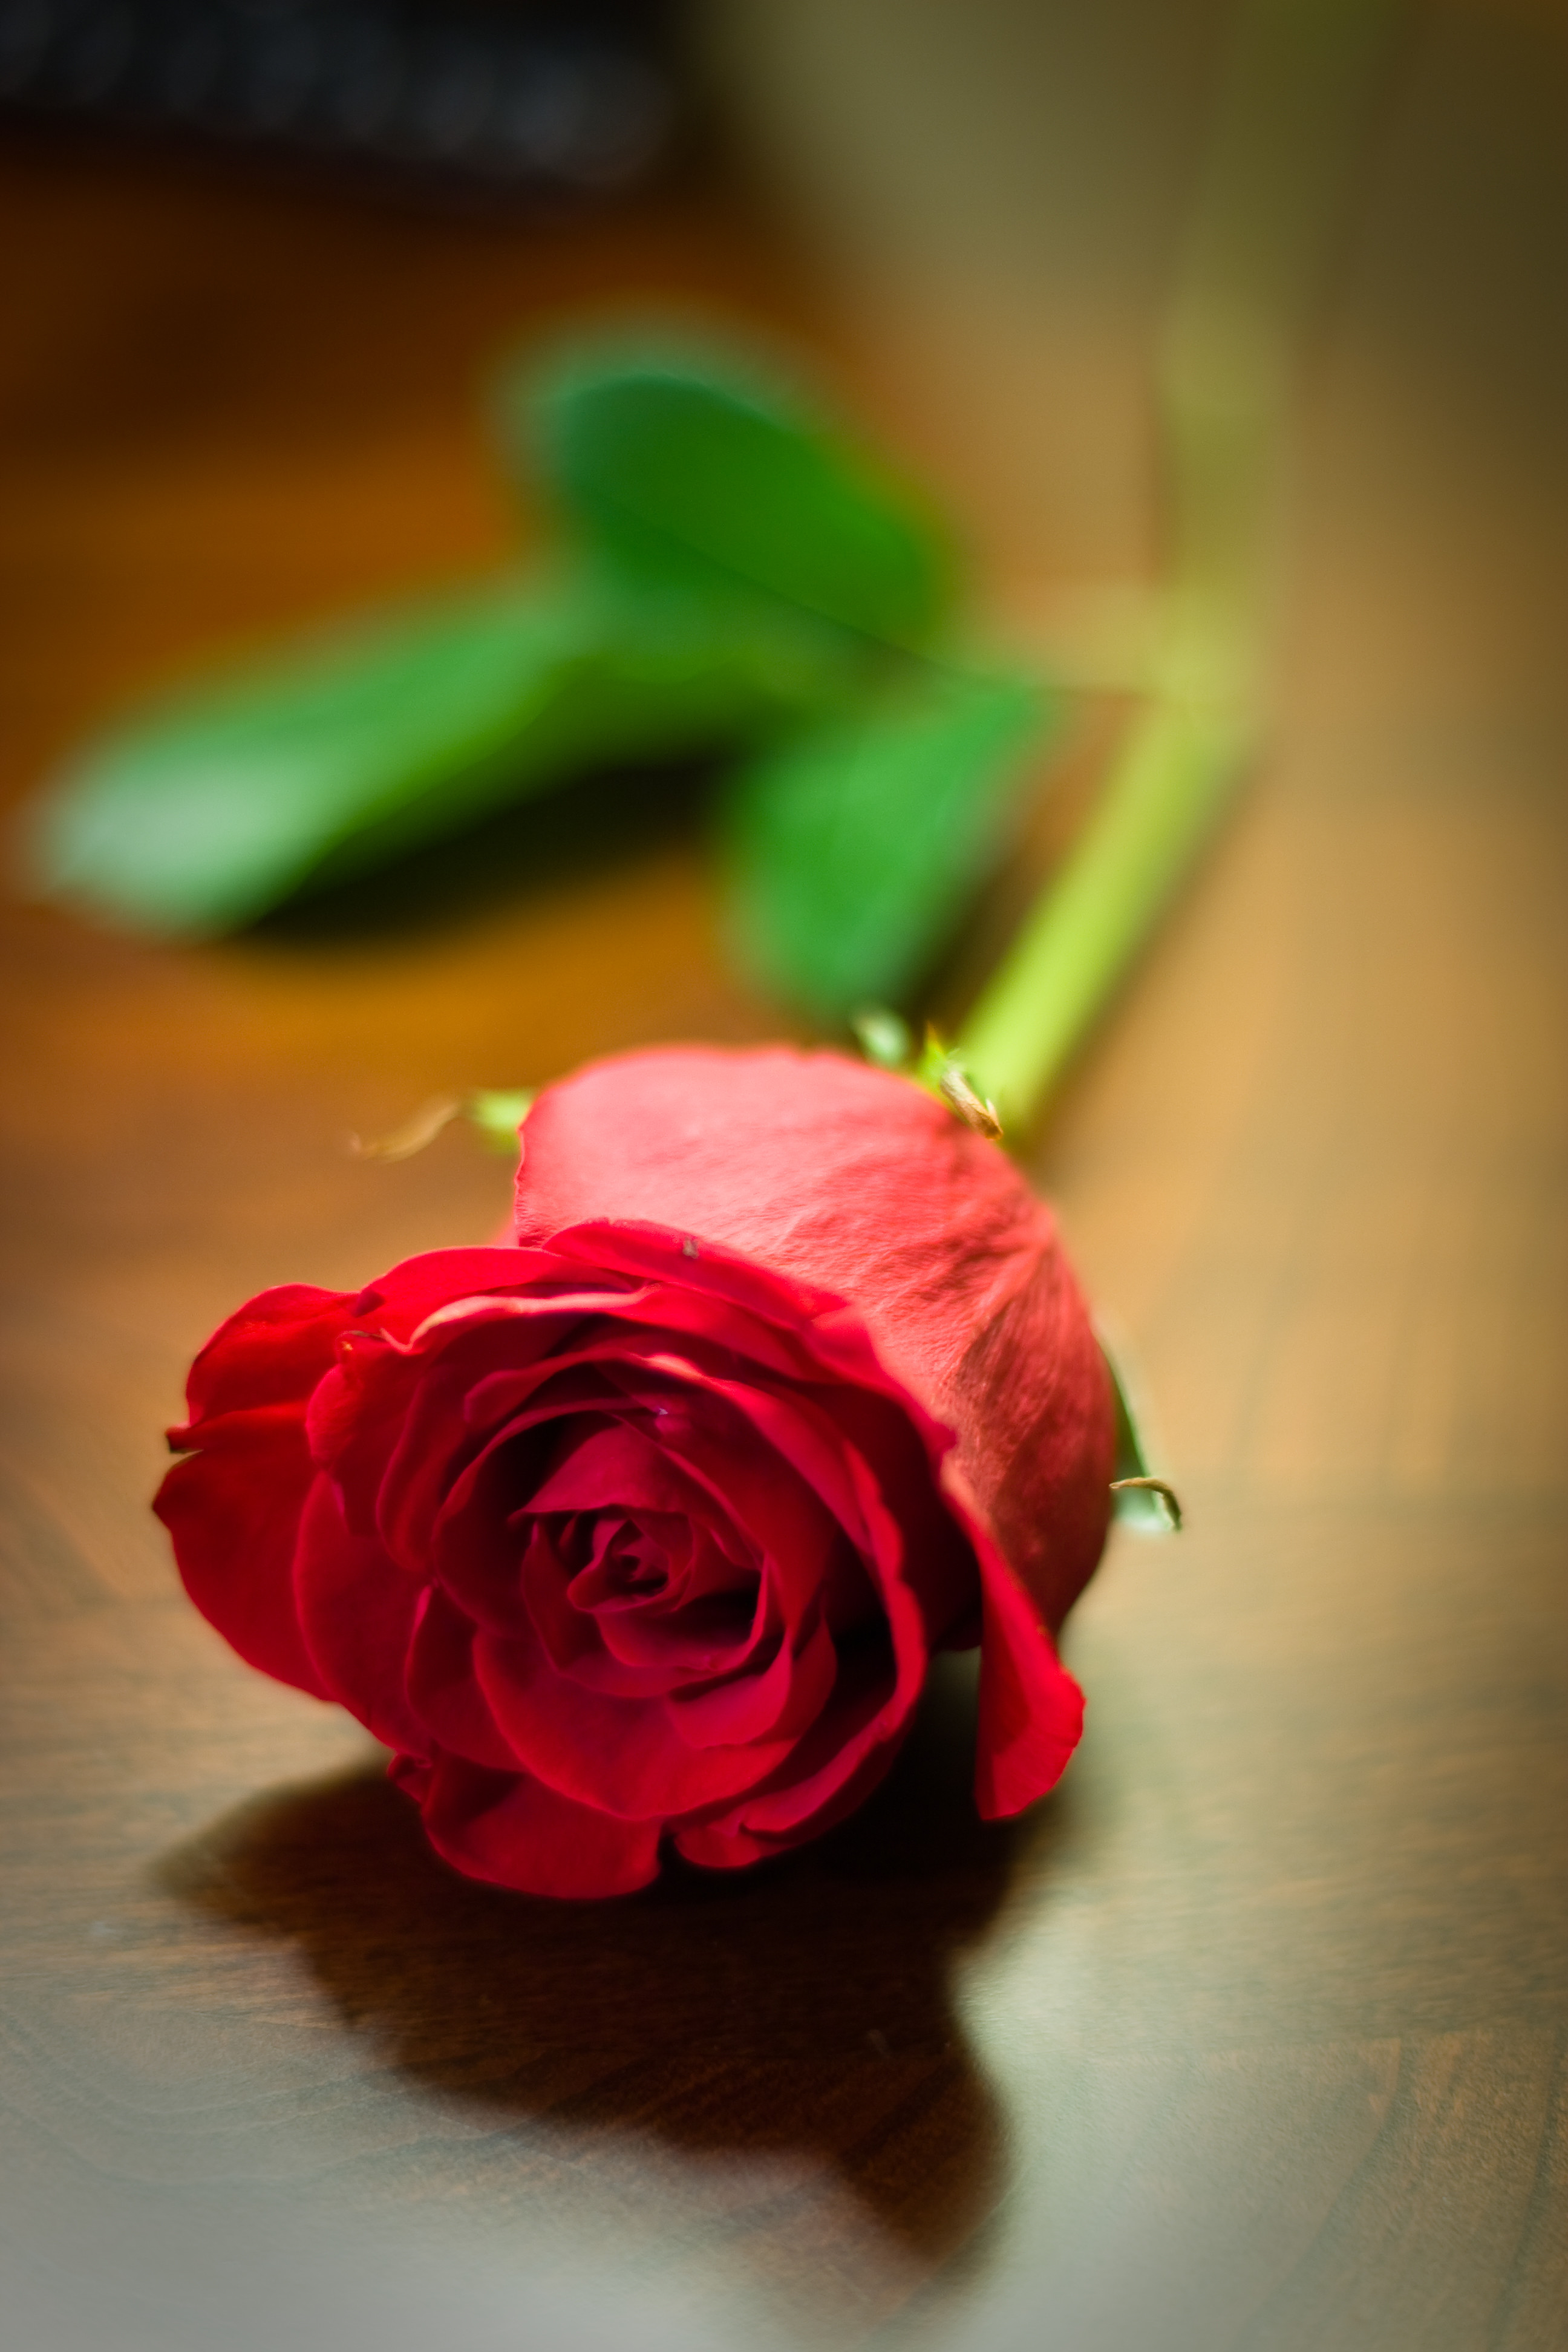 Mobile wallpaper: Flower, Rose, Flowers, Rose Flower, 83717 download the  picture for free.